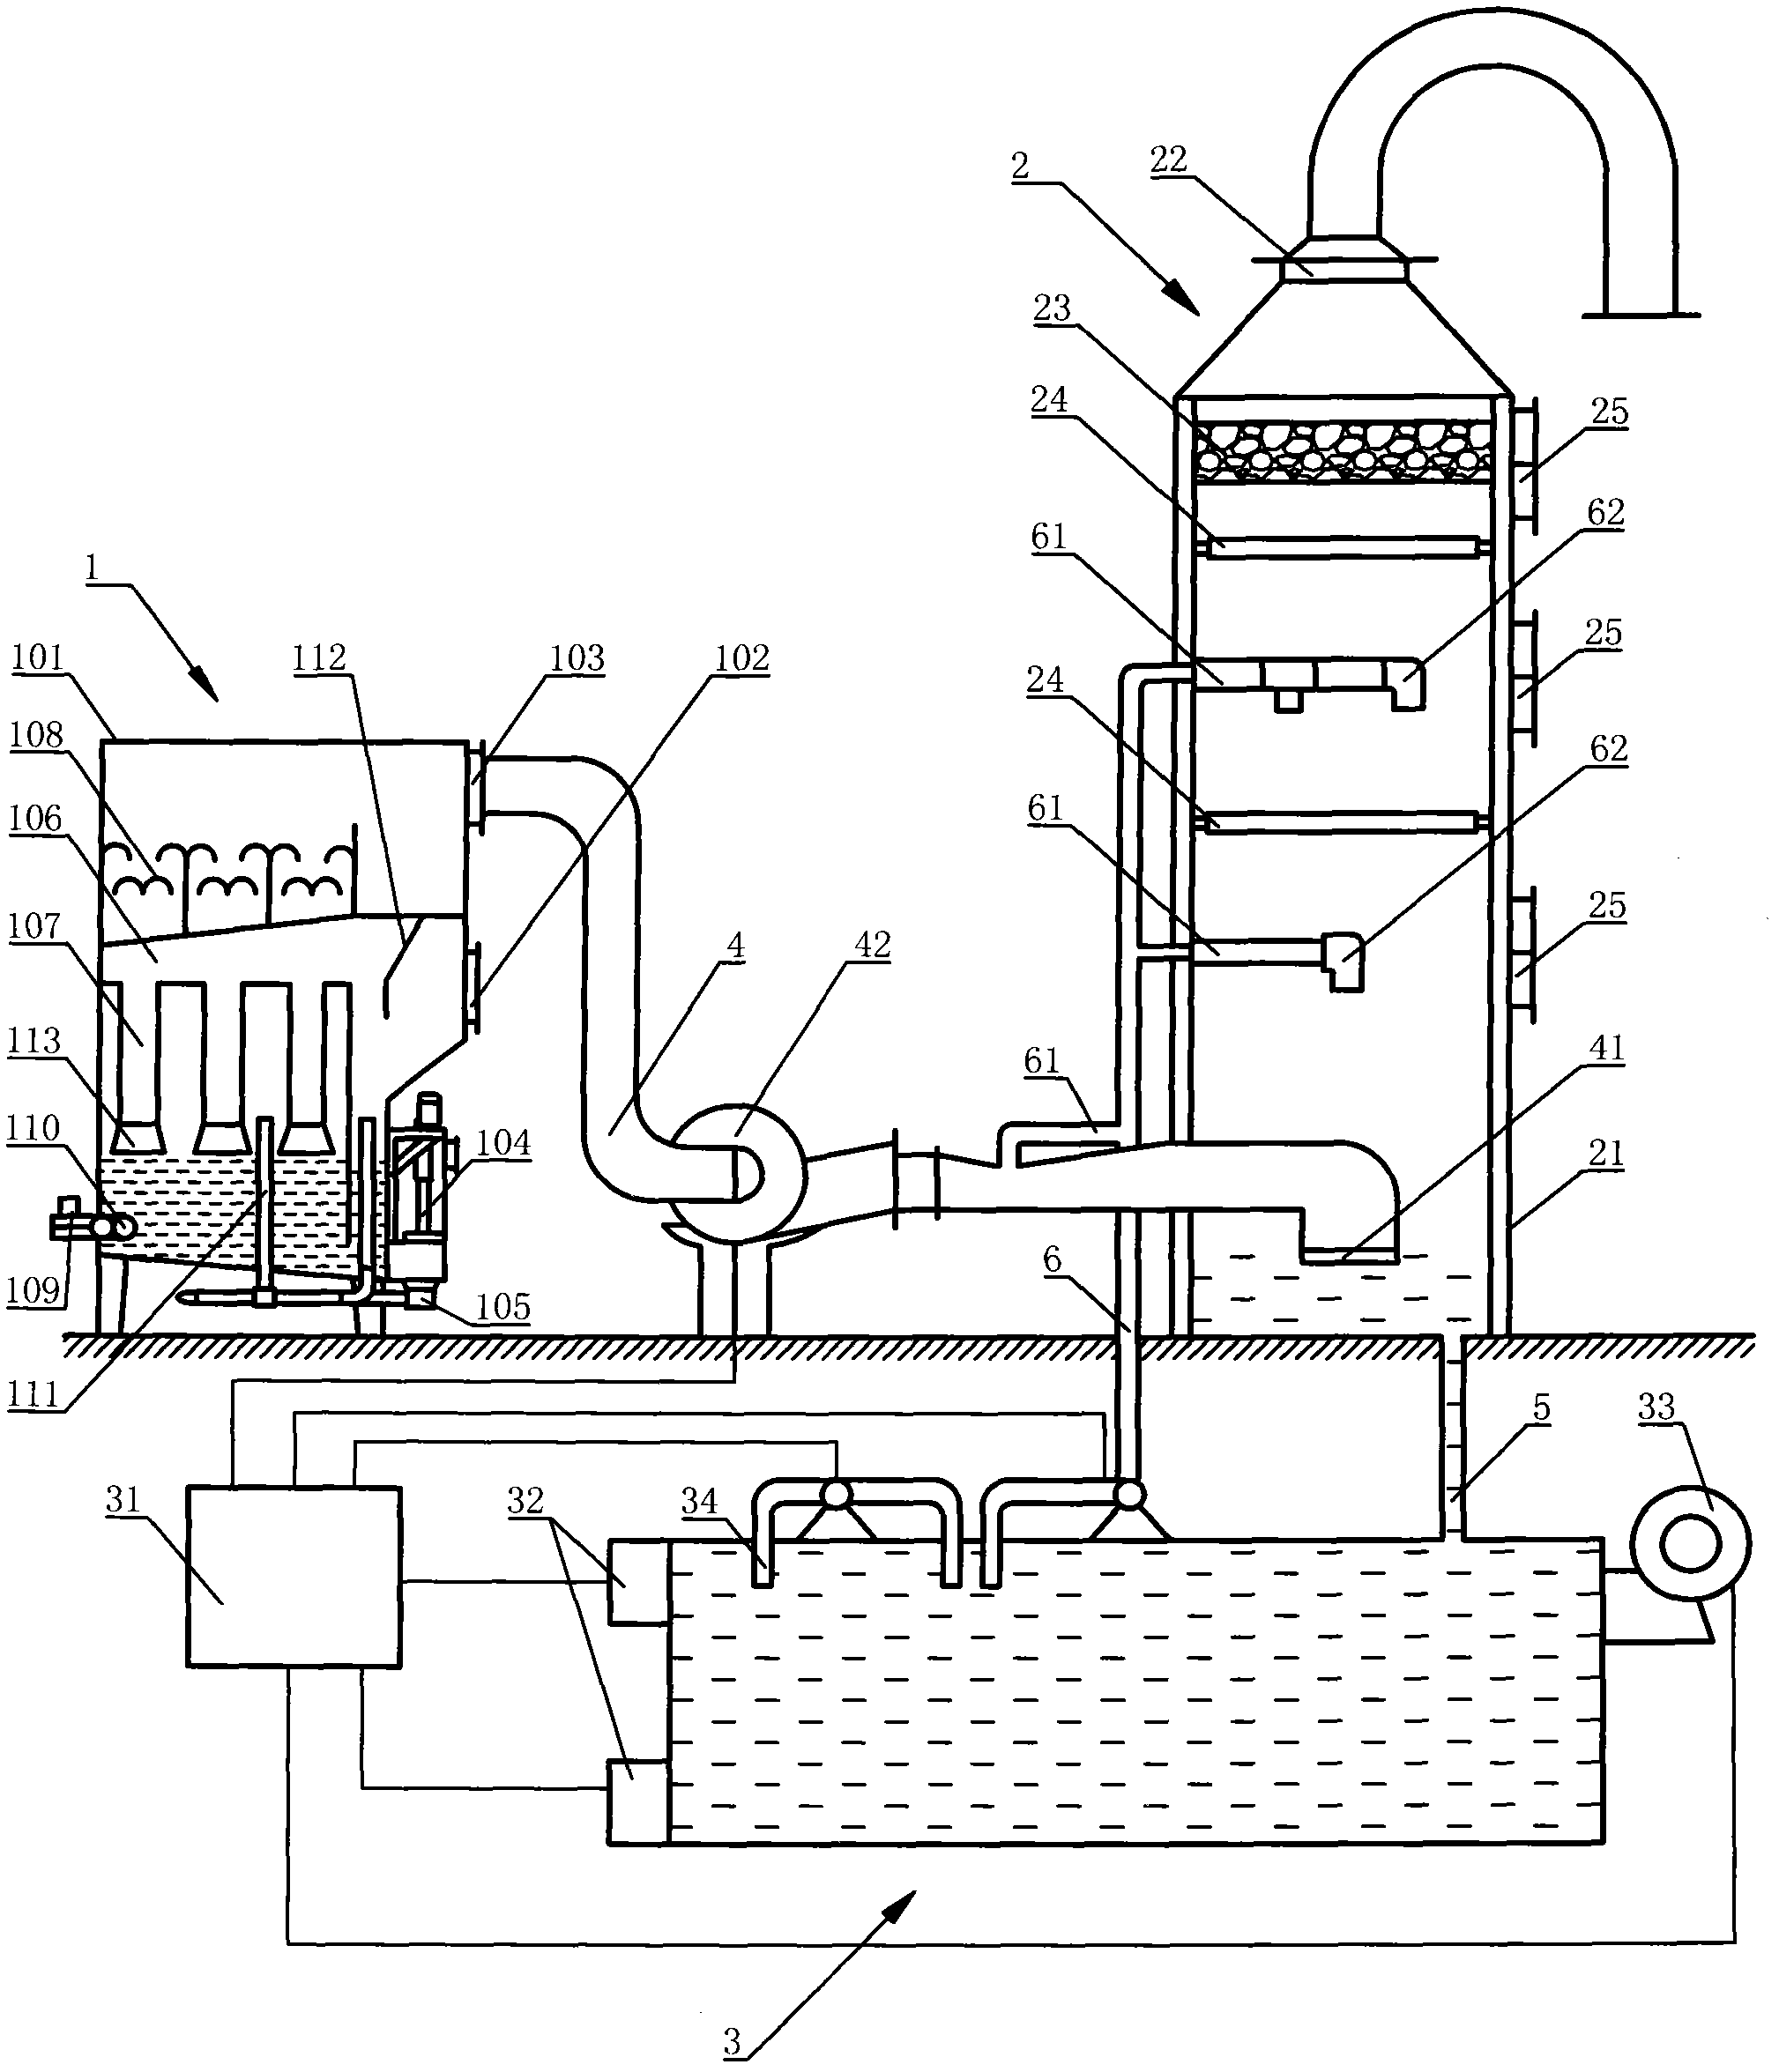 Smoke sulfur-removing and dust-removing system